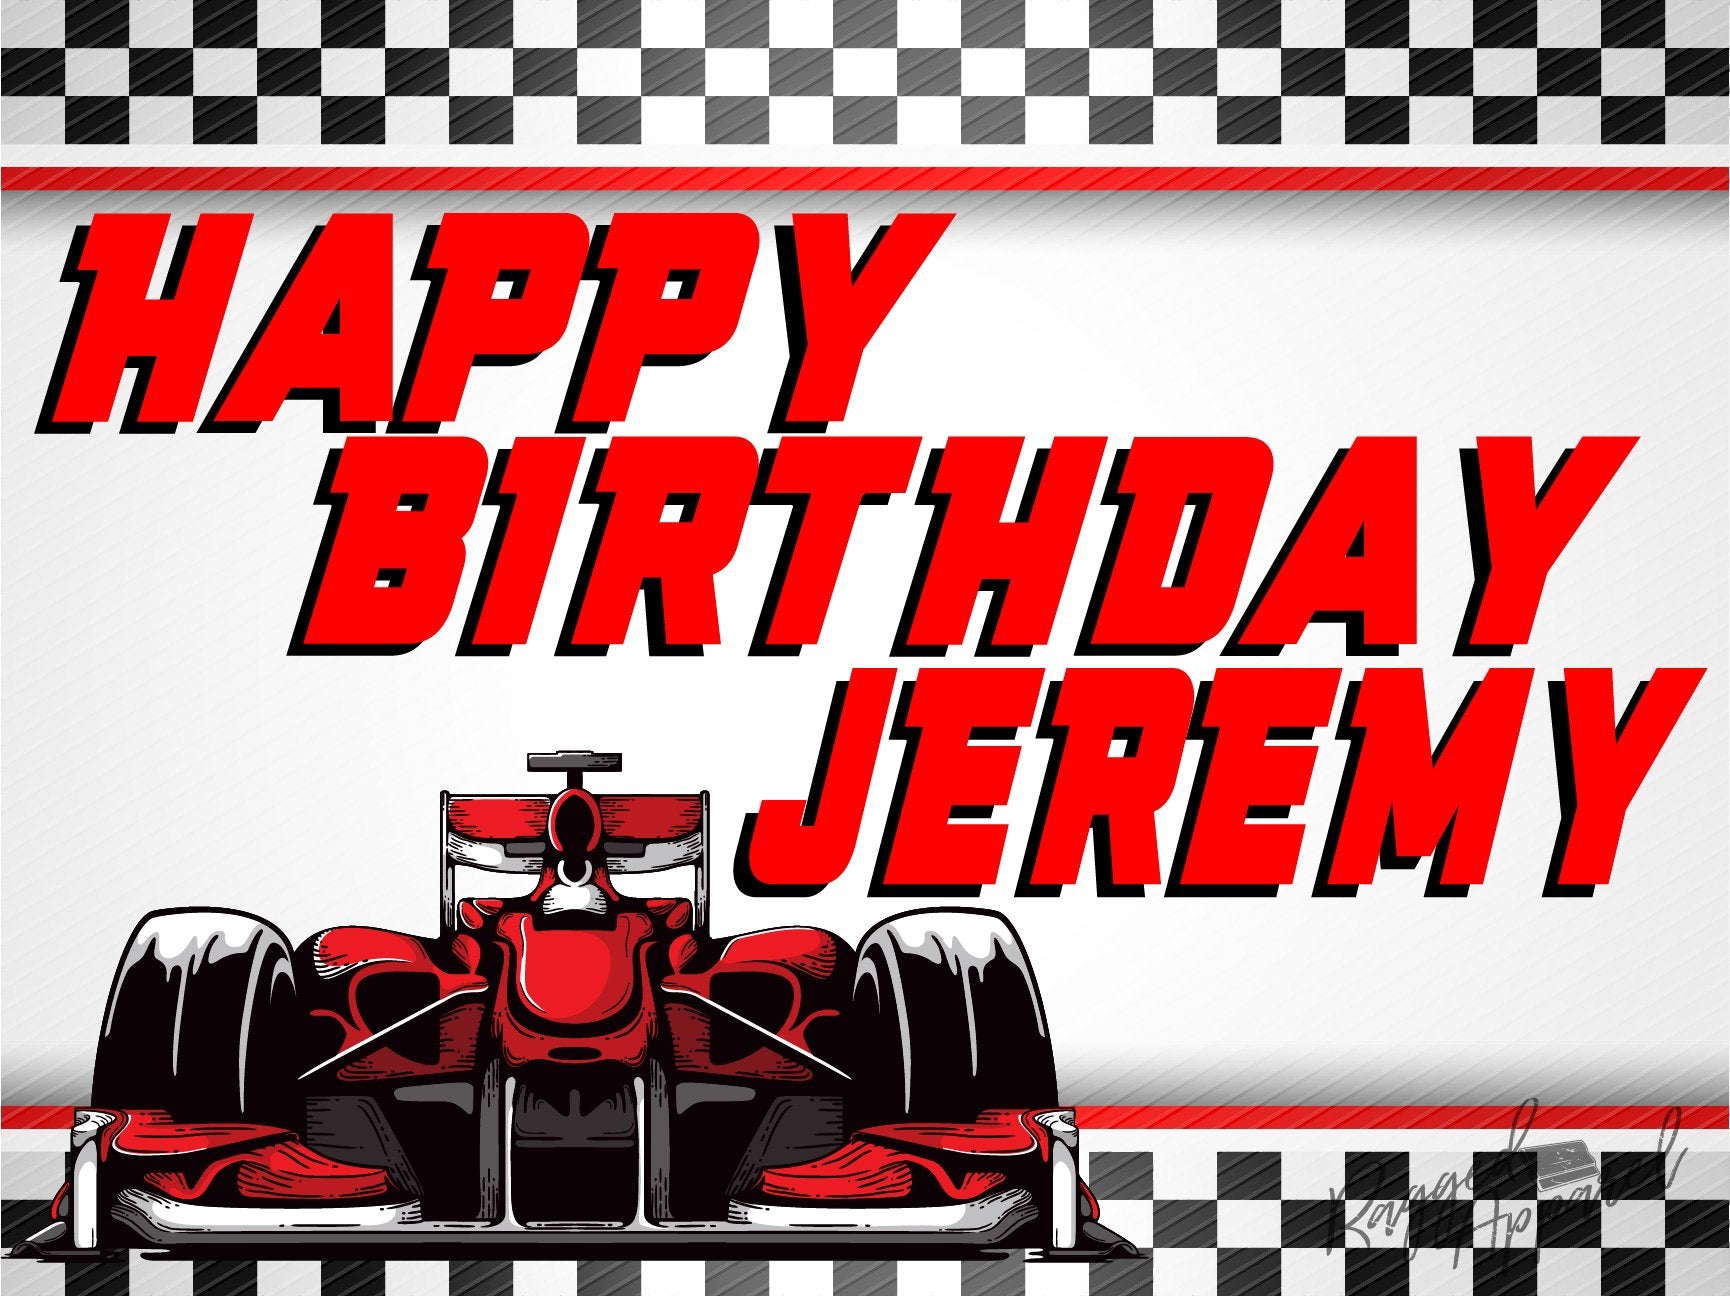 Boys Personalized Racecar Birthday Sign - Ragged Apparel Screen Printing and Signs - www.nmshirts.com